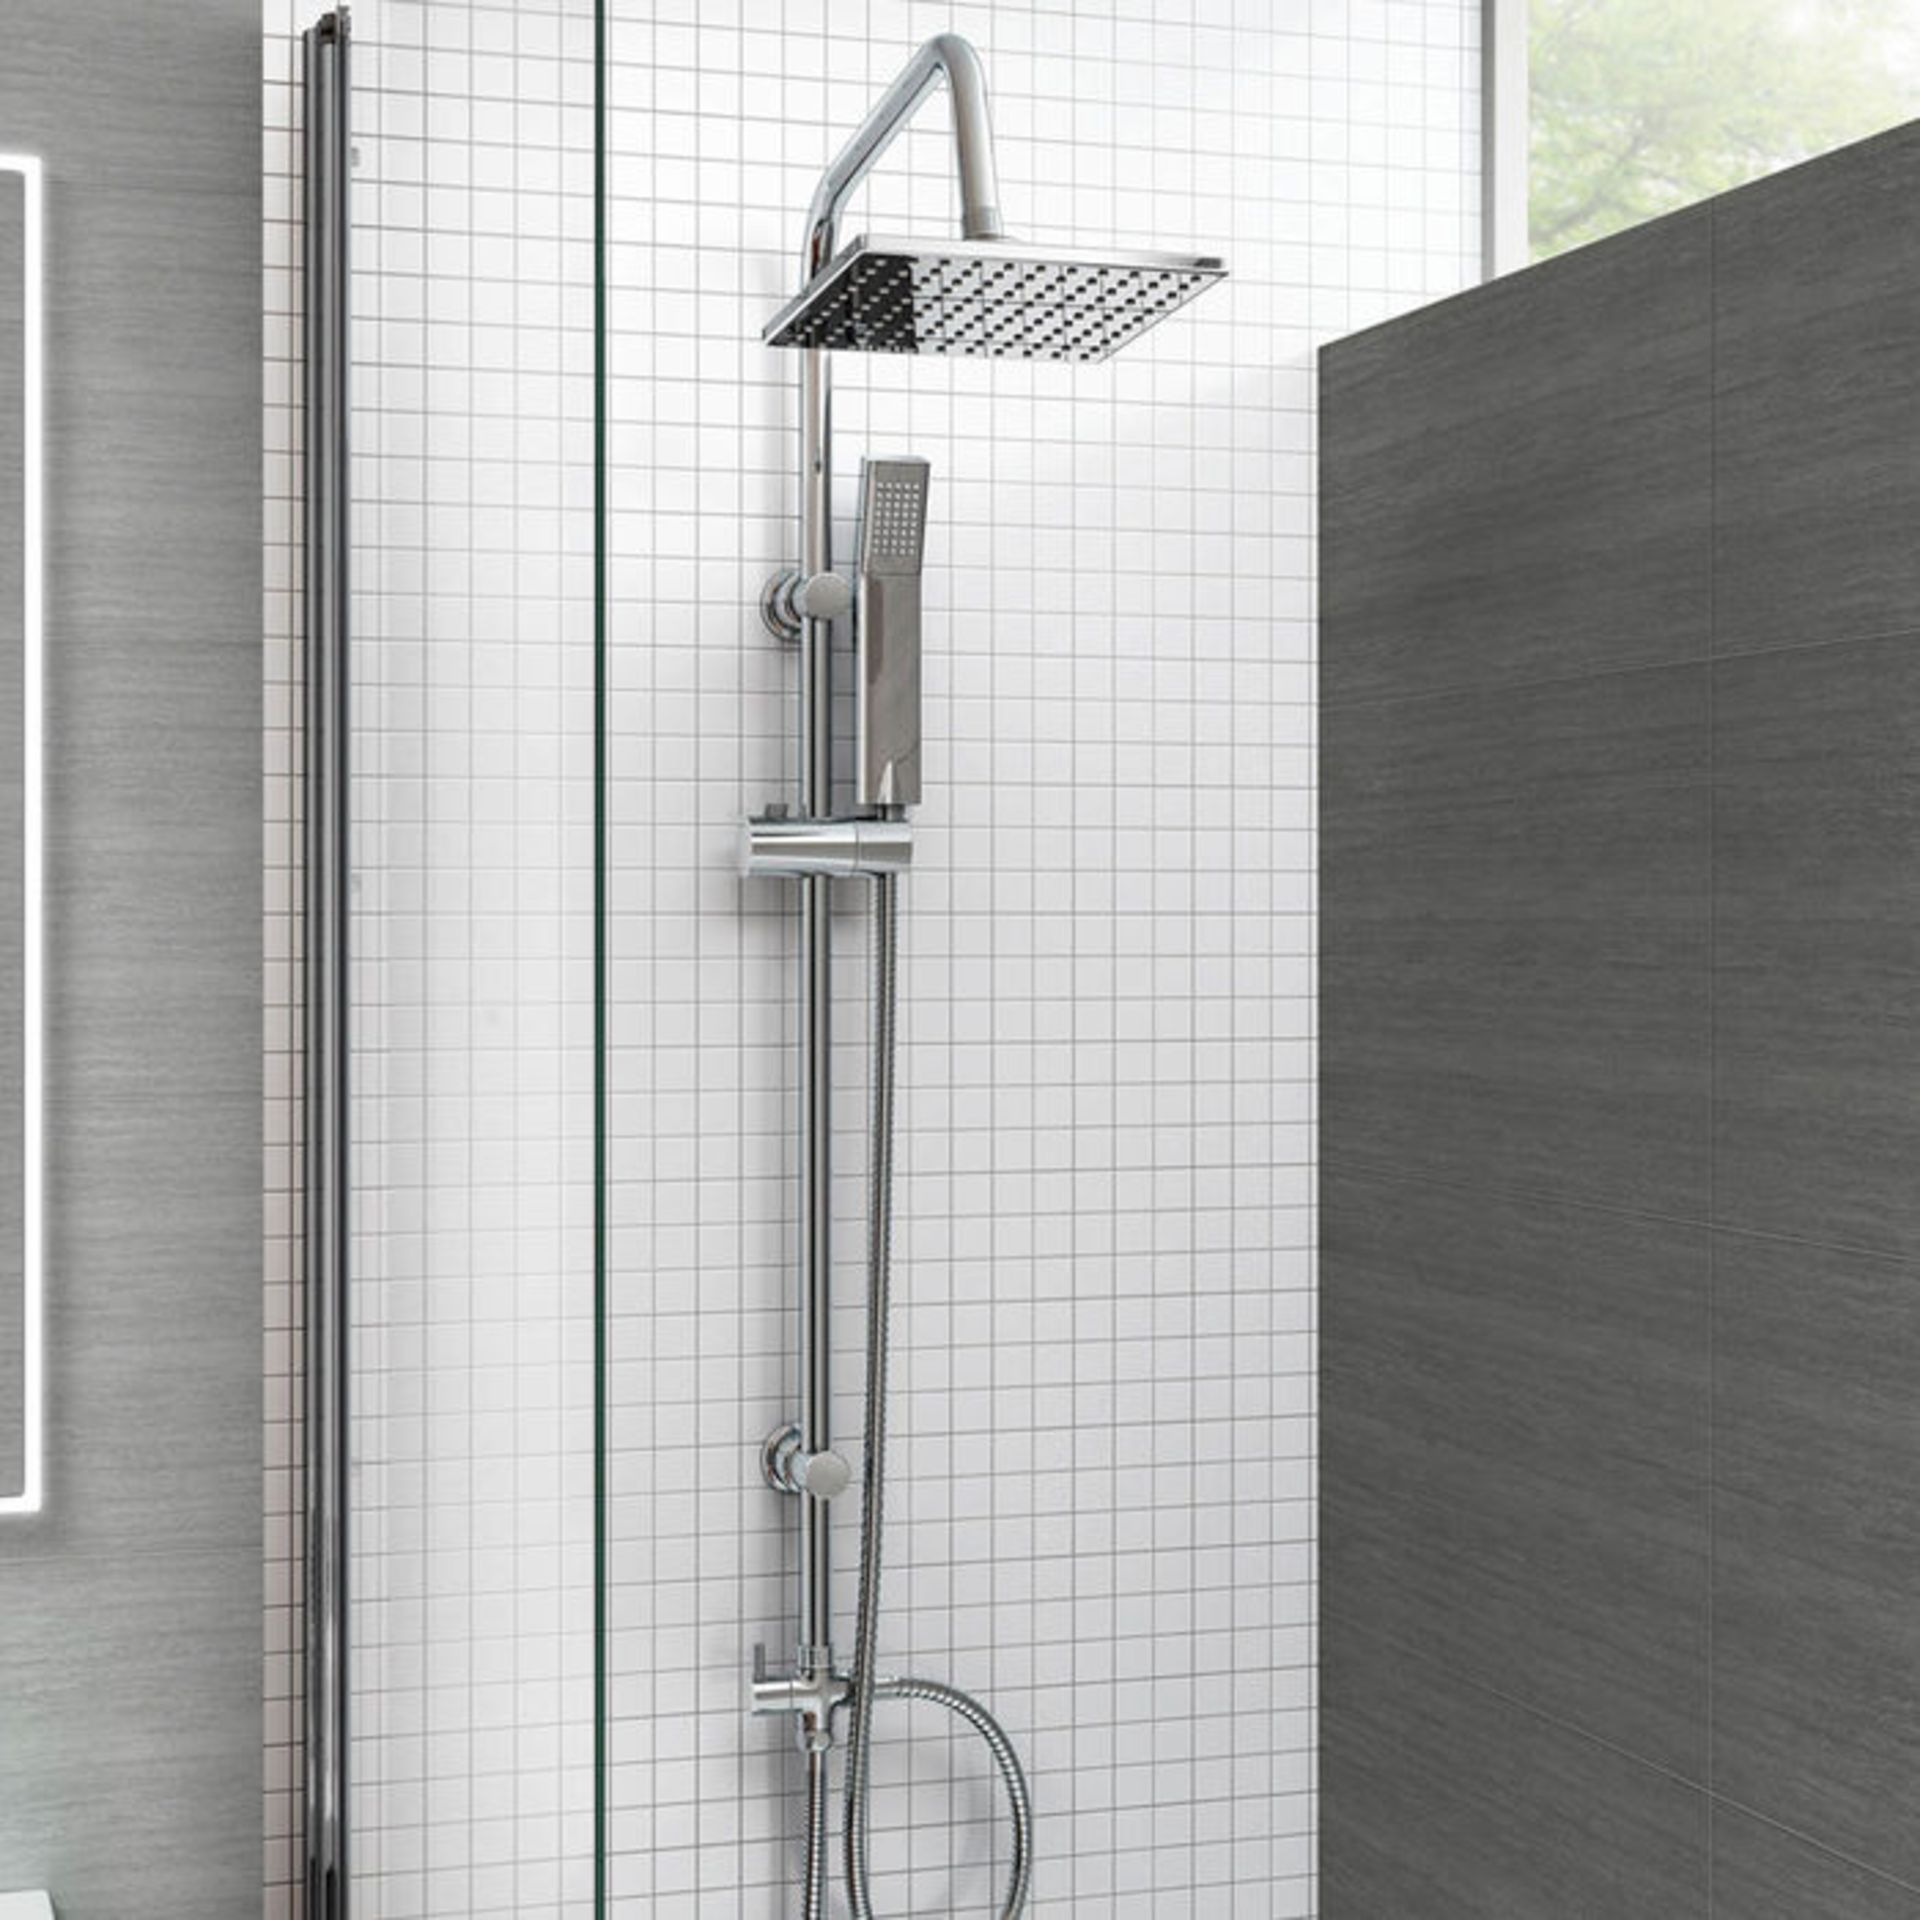 (PA29) 200mm Square Head, Riser Rail & Handheld Kit. Quality stainless steel shower head with Easy